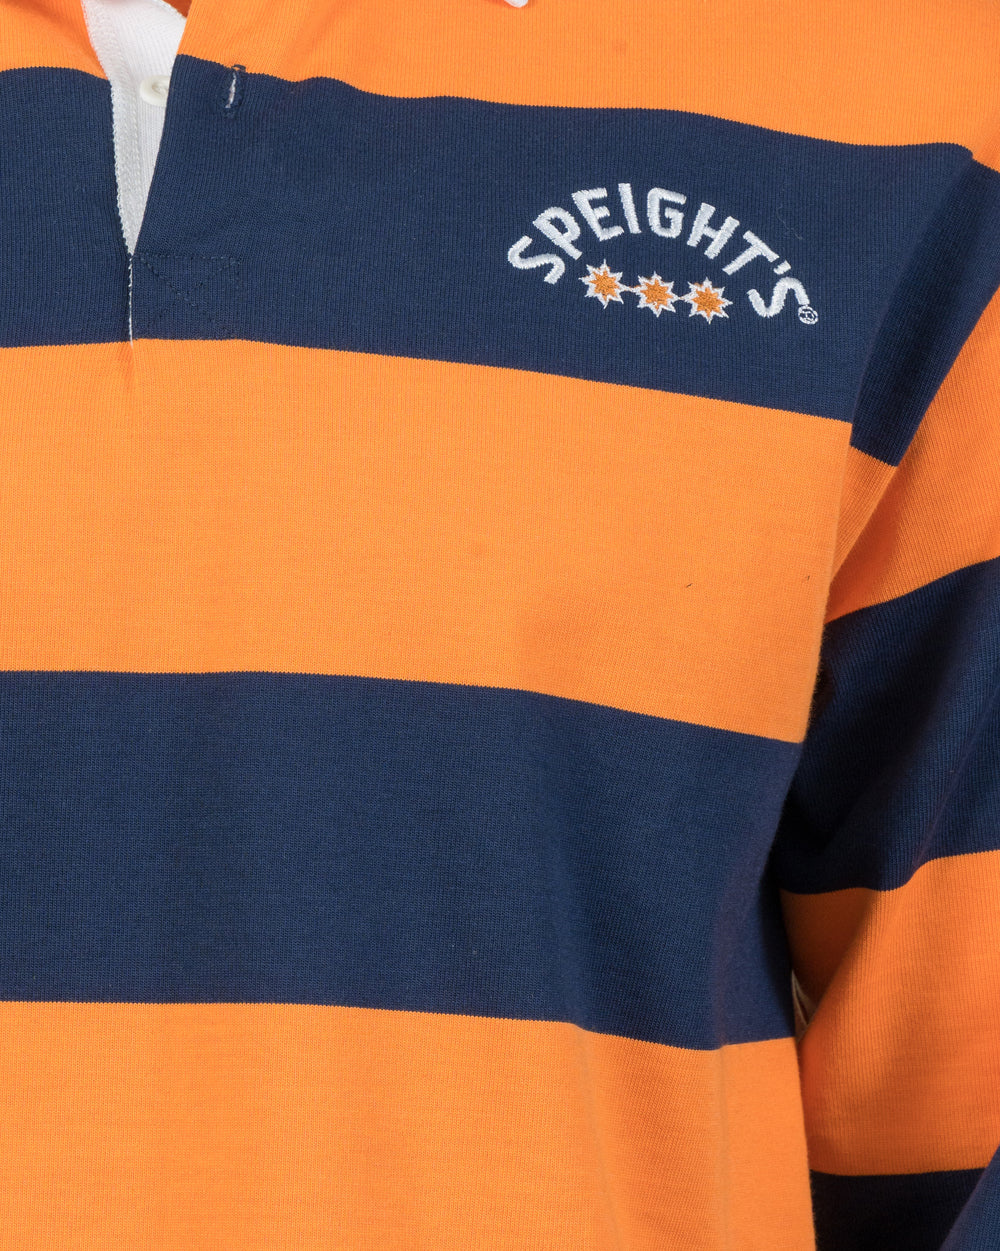 Speight's Hoop Heritage Rugby Jersey -  Beer Gear Apparel & Merchandise - Speights - Lion Red - VB - Tokyo Dy merch